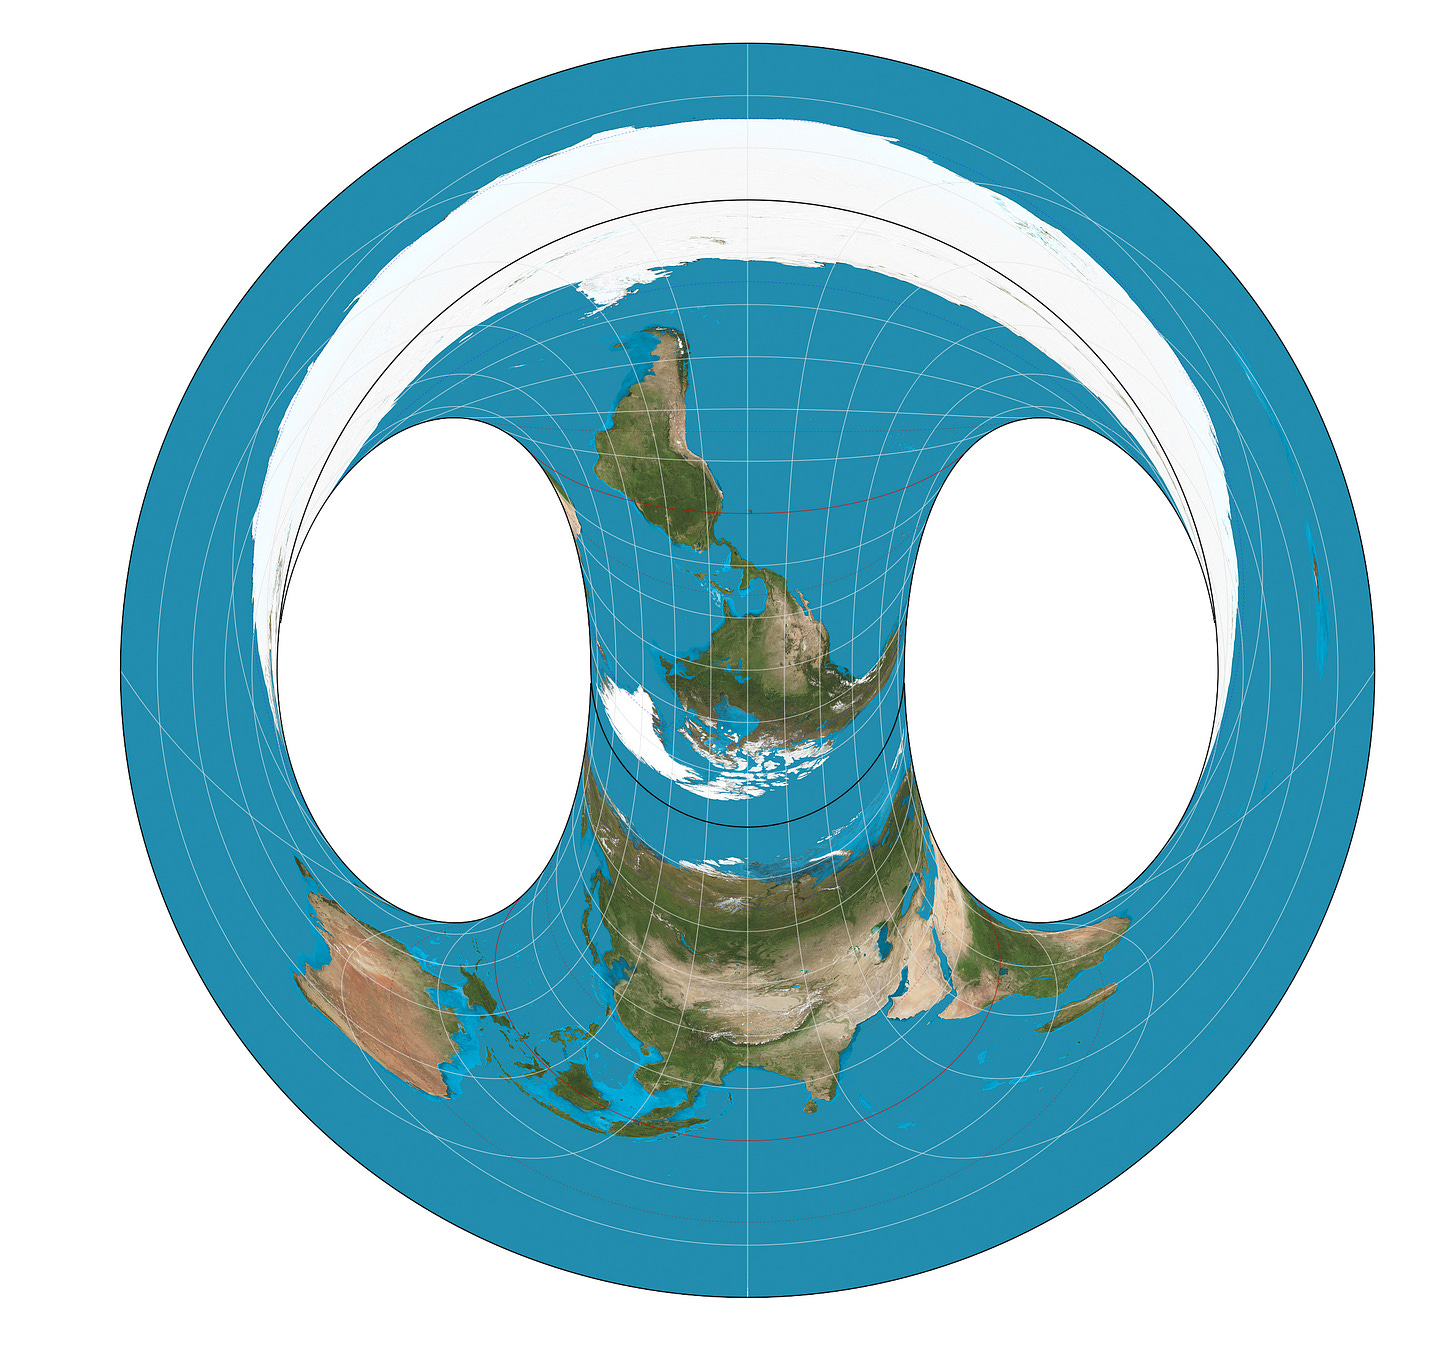 Hammer_retroazimuthal_projection_combined1.jpg